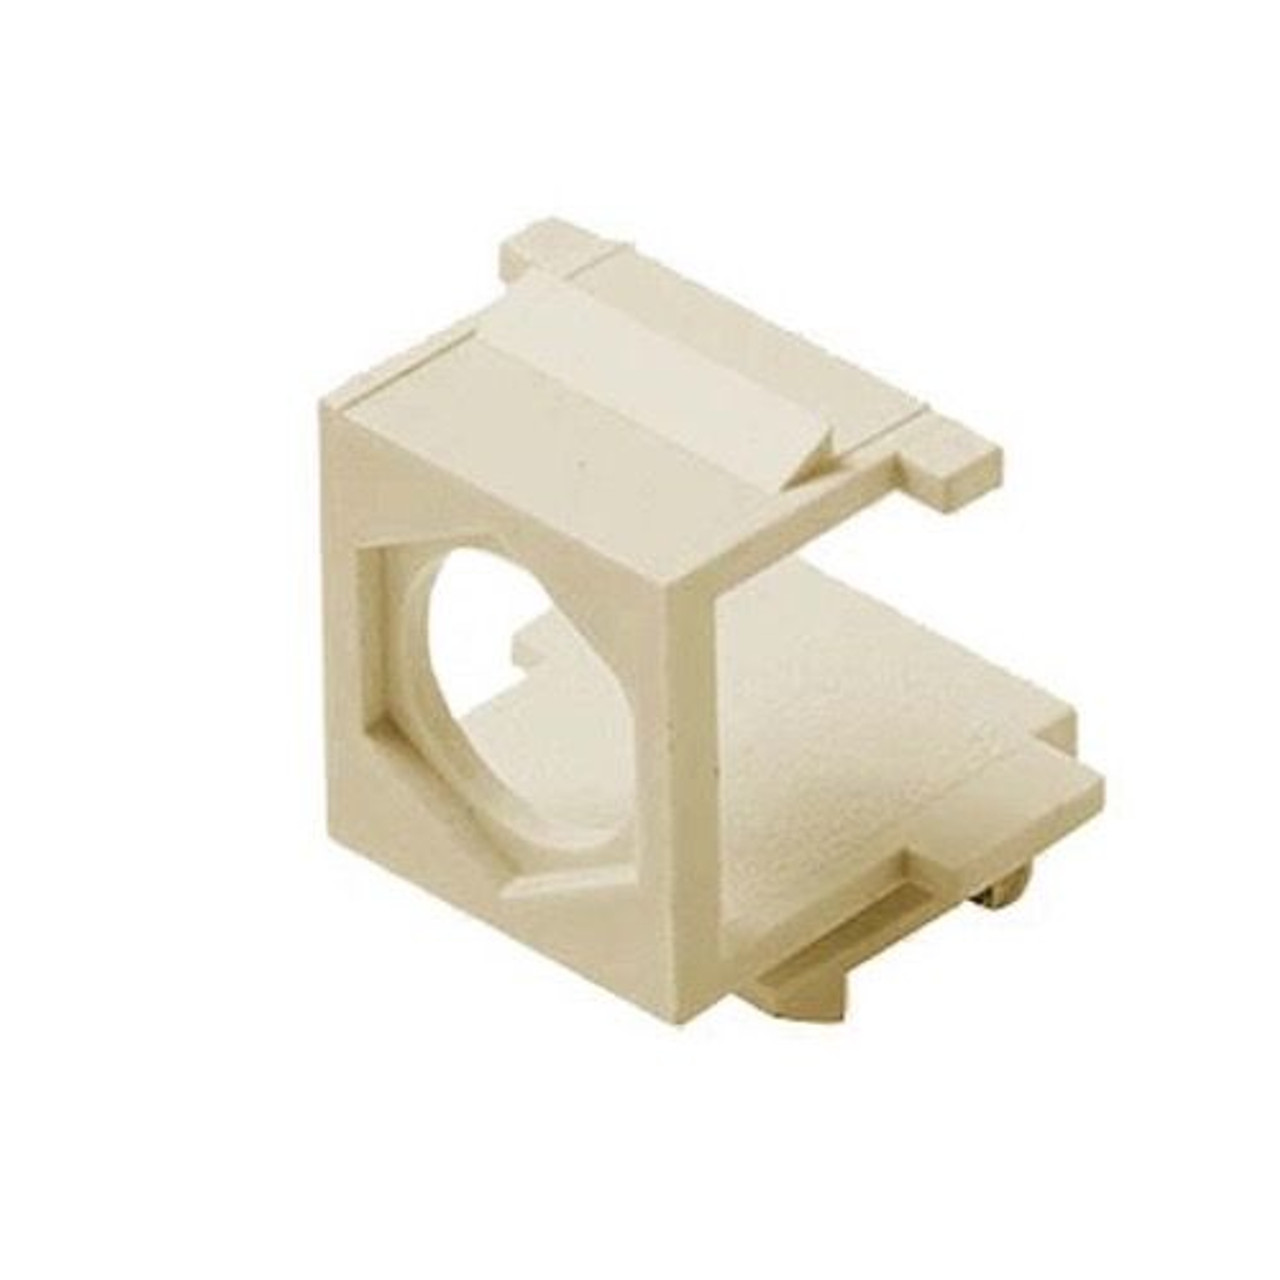 Eagle F Type Blank Keystone Jack Insert Ivory Module F-Connector Blank Wall Plate Module A/V QuickPort Thru Port Snap-In with Hole Coaxial Cable TV Wire Run